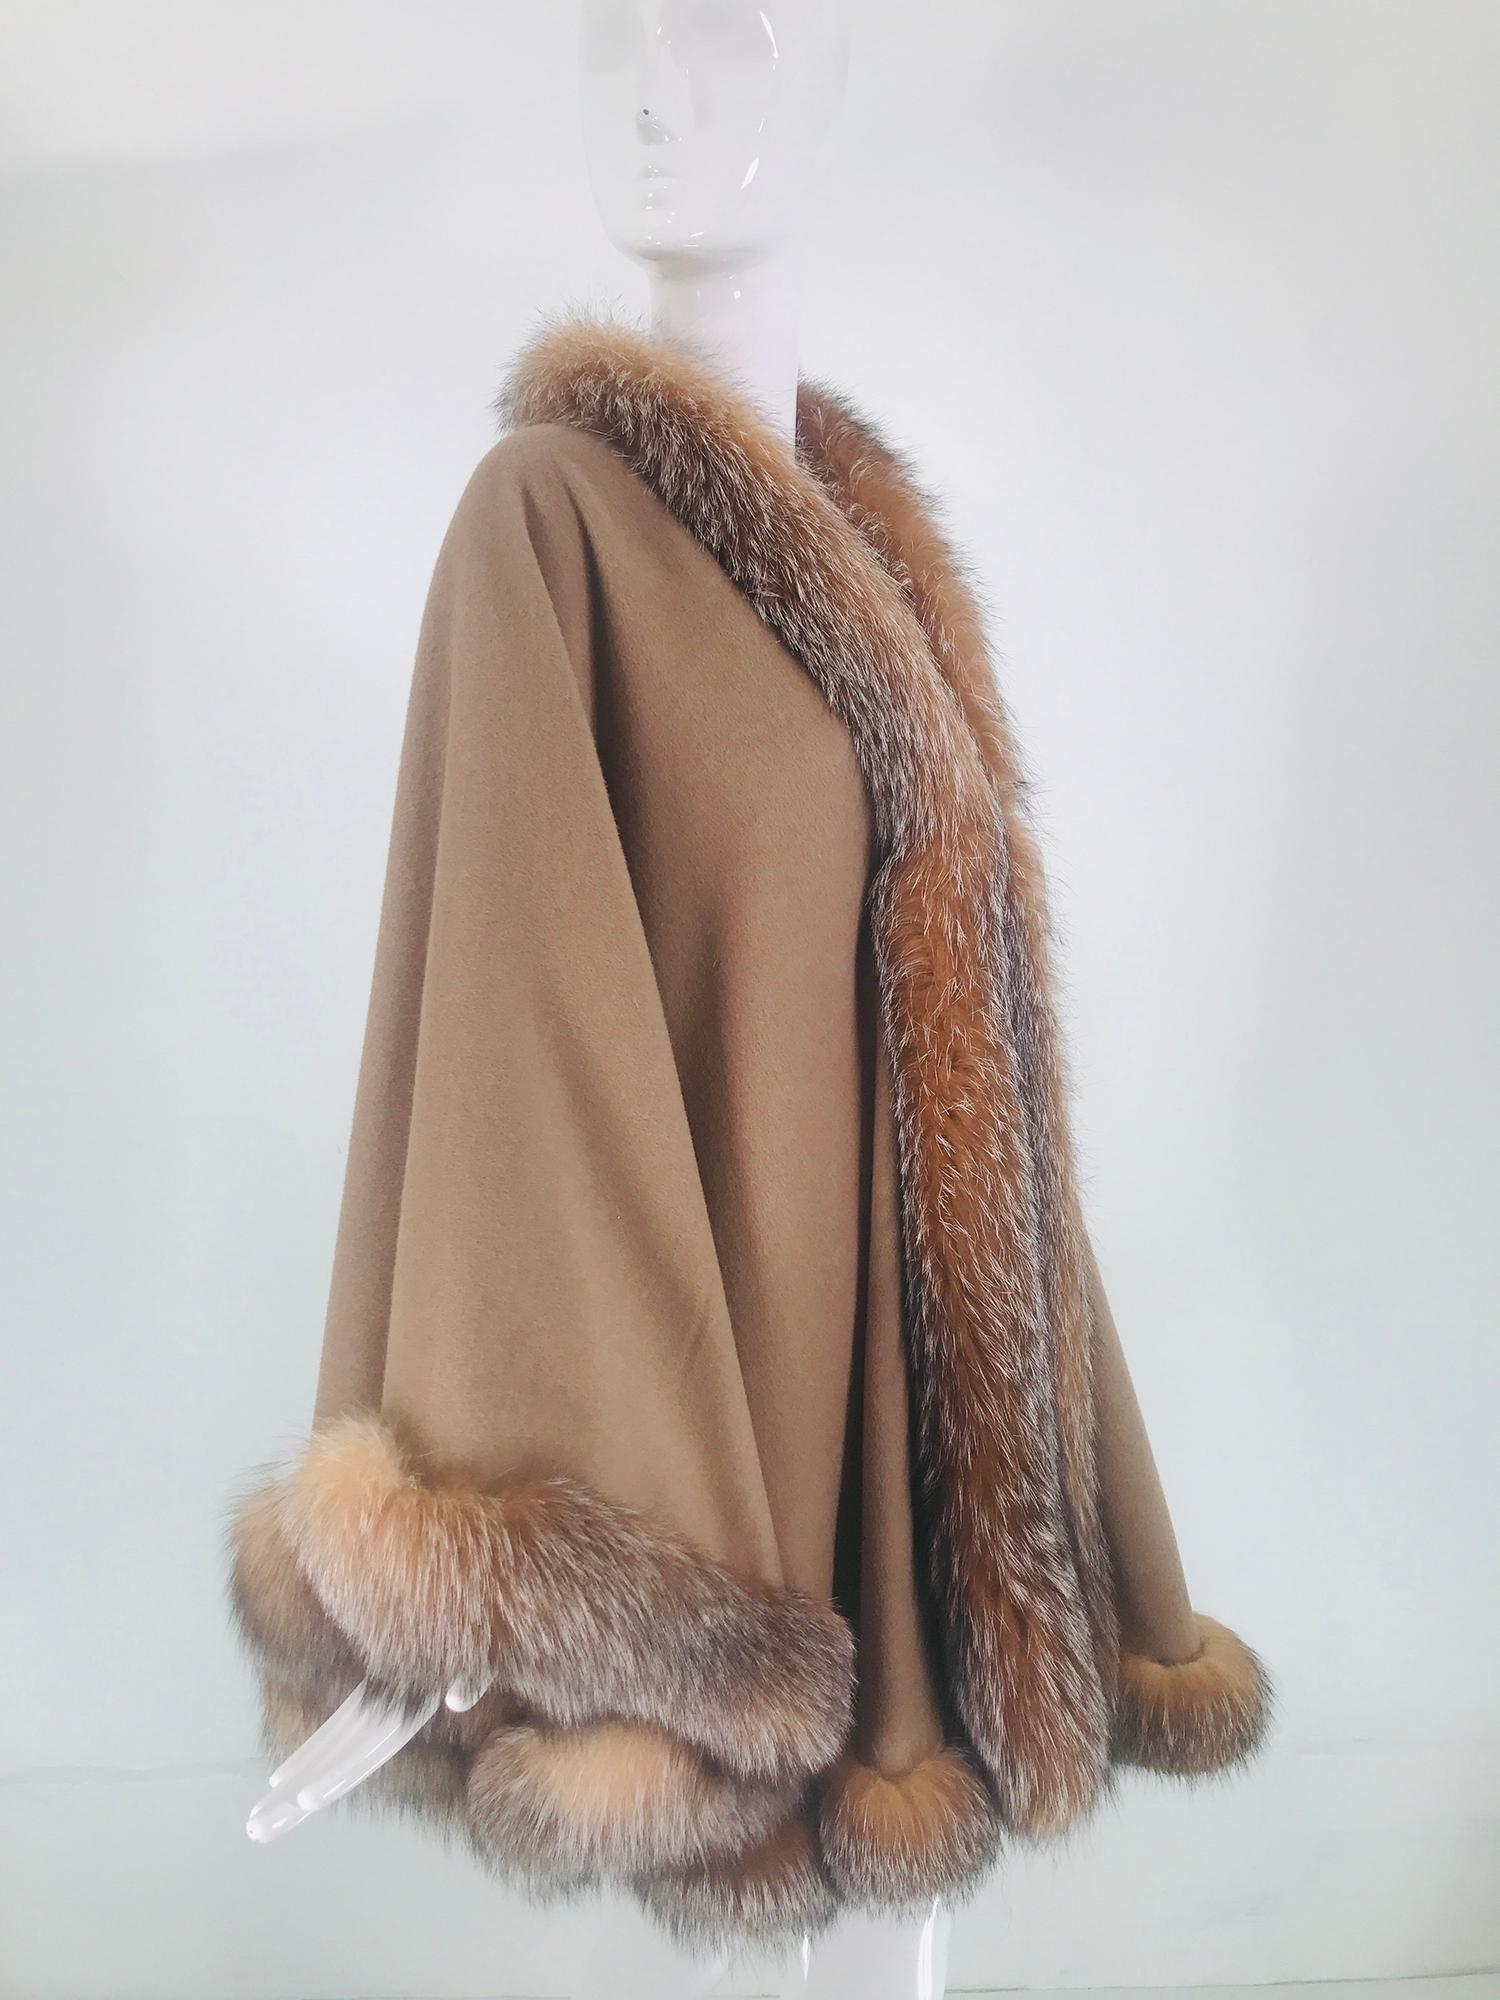 Sprung Freres Paris Red Fox Wool/Cashmere Reversible Cape Grey/Camel Tan OS 3